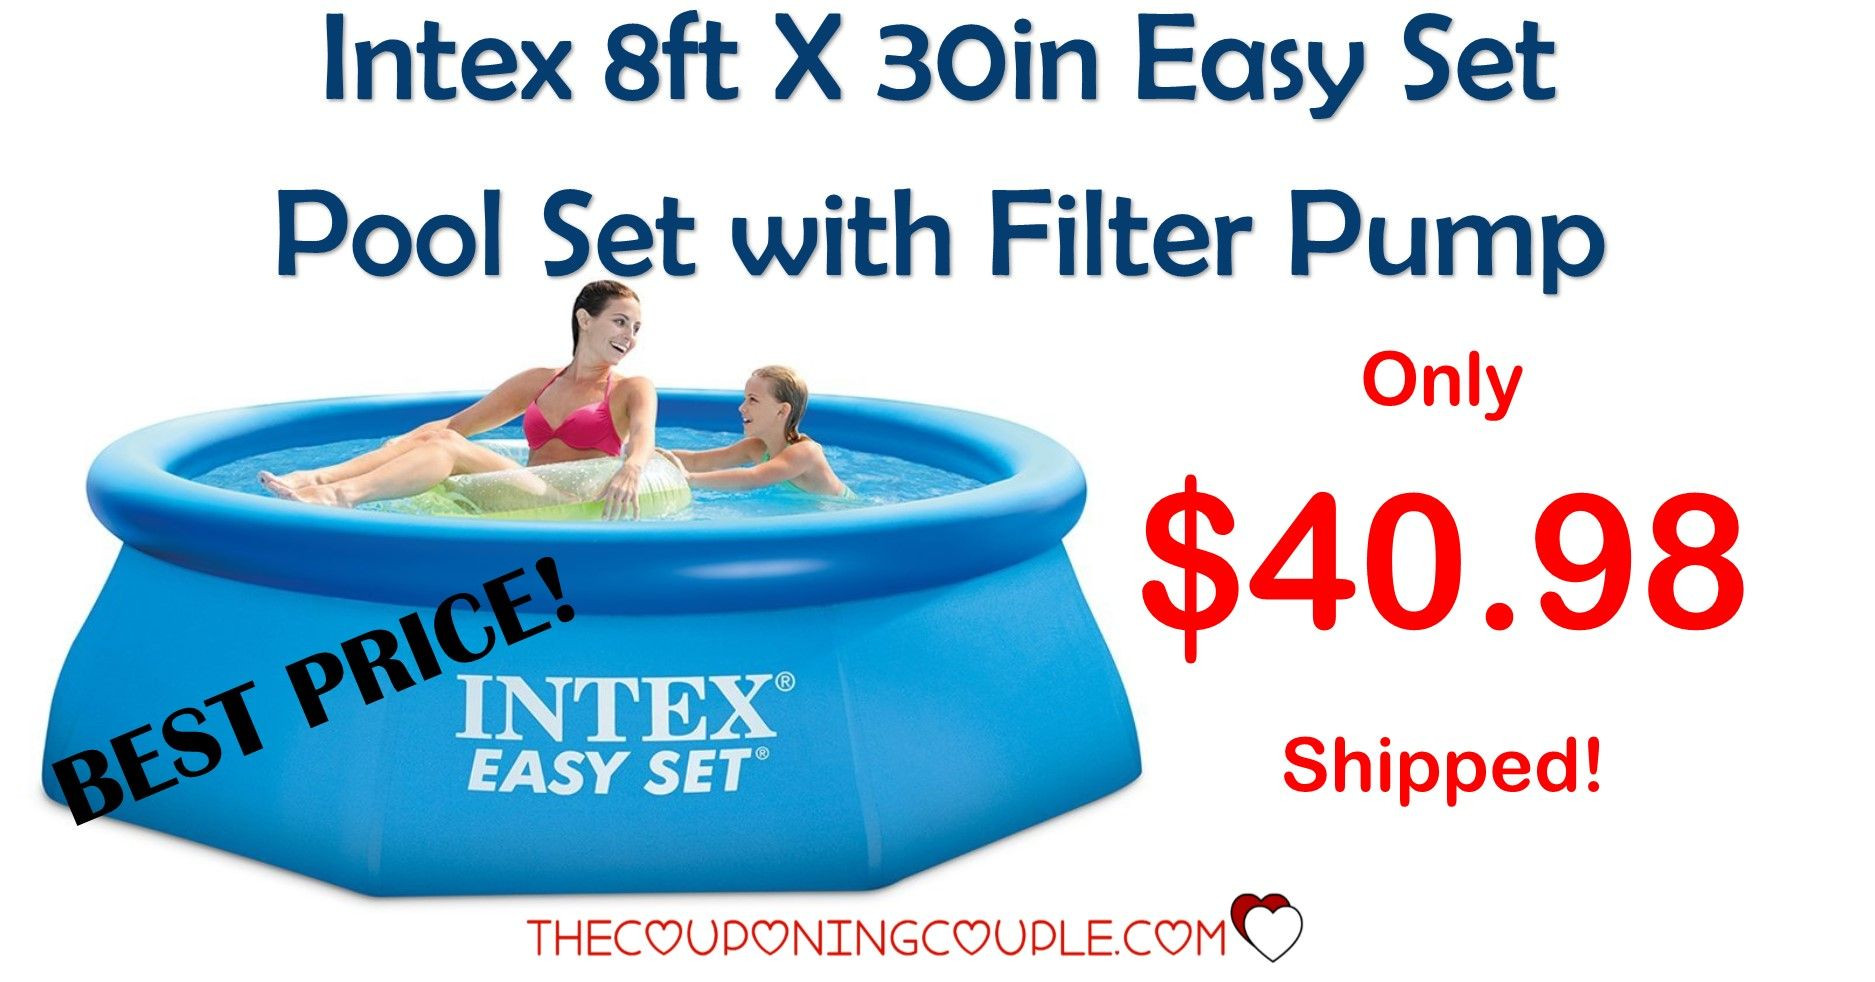 Backyard Pool Superstore Coupons
 Intex 8ft X 30in Easy Set Pool Set with Filter Pump ly